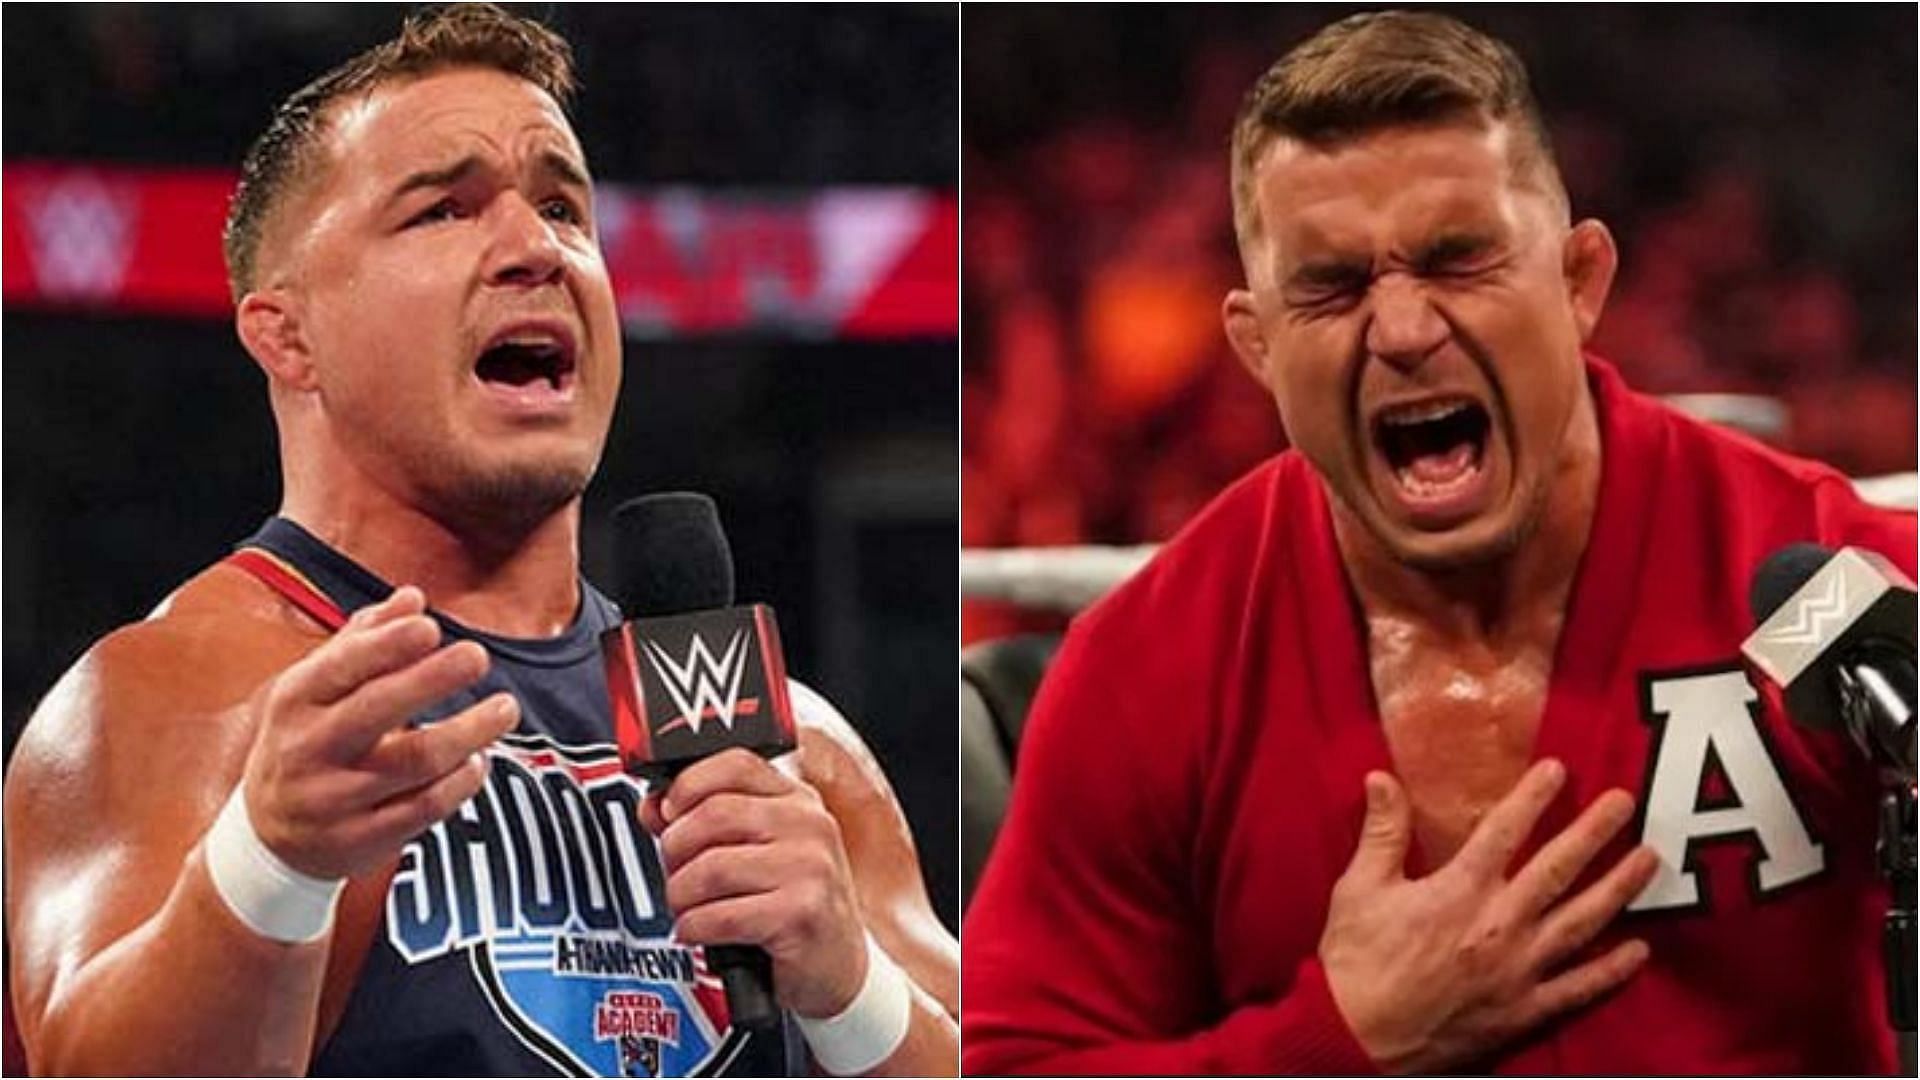 Chad Gable sent message to a WWE Superstar